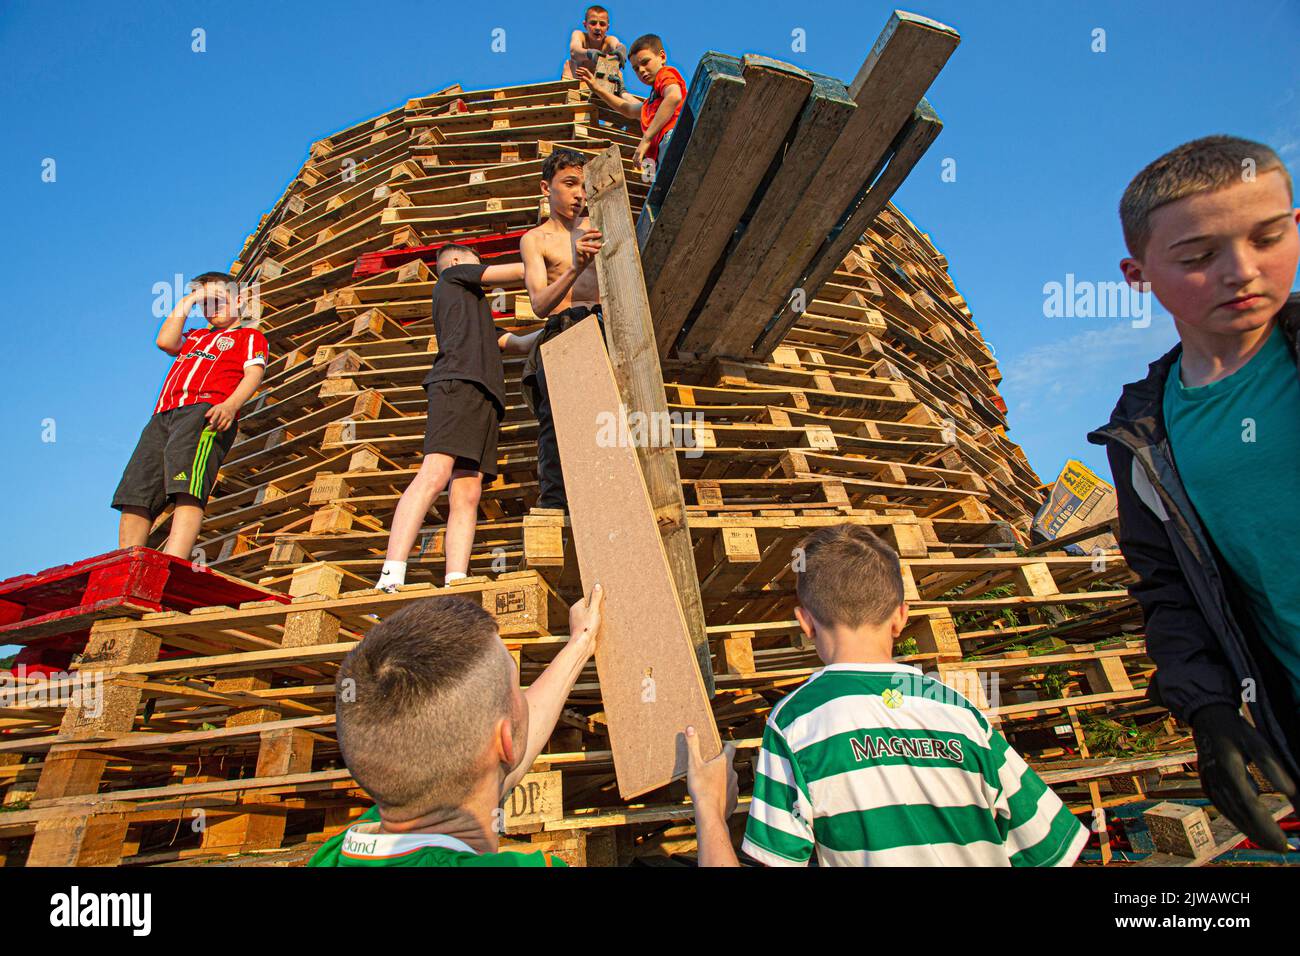 Kids stack pallets over the weekend in preparation for the bonfire marking a Catholic feast day of the Assumption of the Virgin Mary in the Bogside. Stock Photo